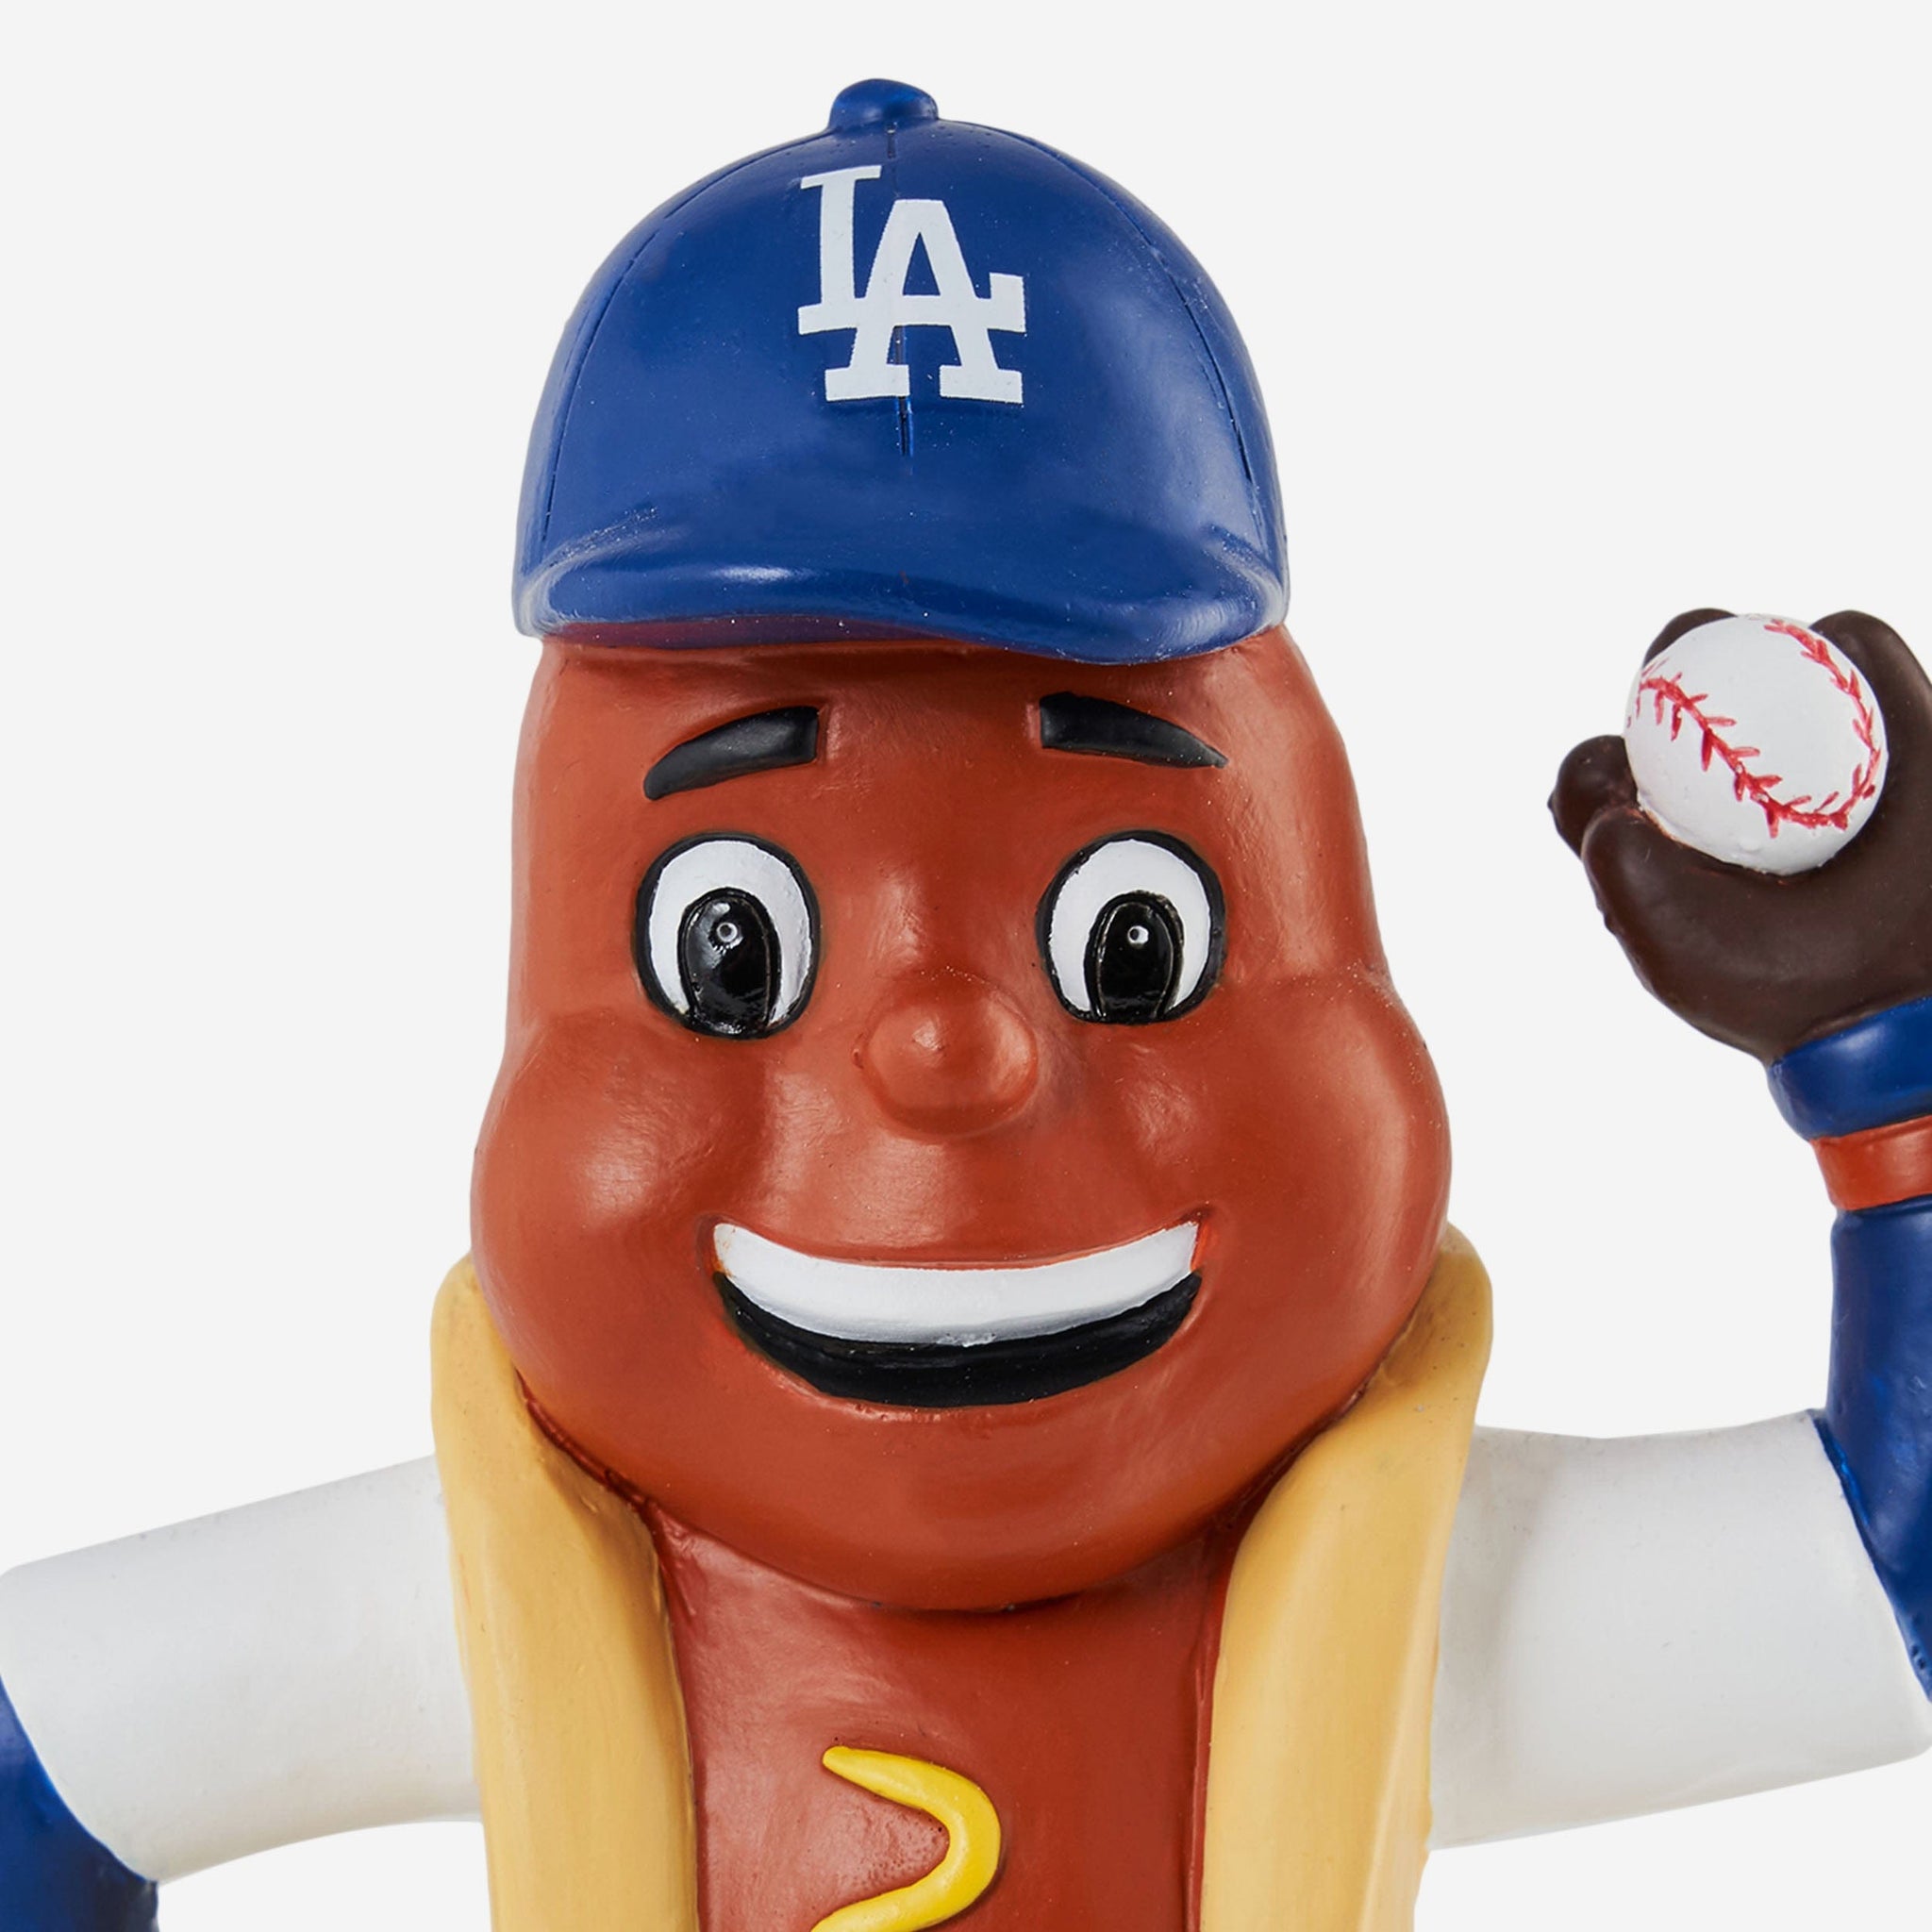 Dodger Dog Los Angeles Dodgers 2023 All-Star Bobbles on Parade Mascot Bobblehead Officially Licensed by MLB